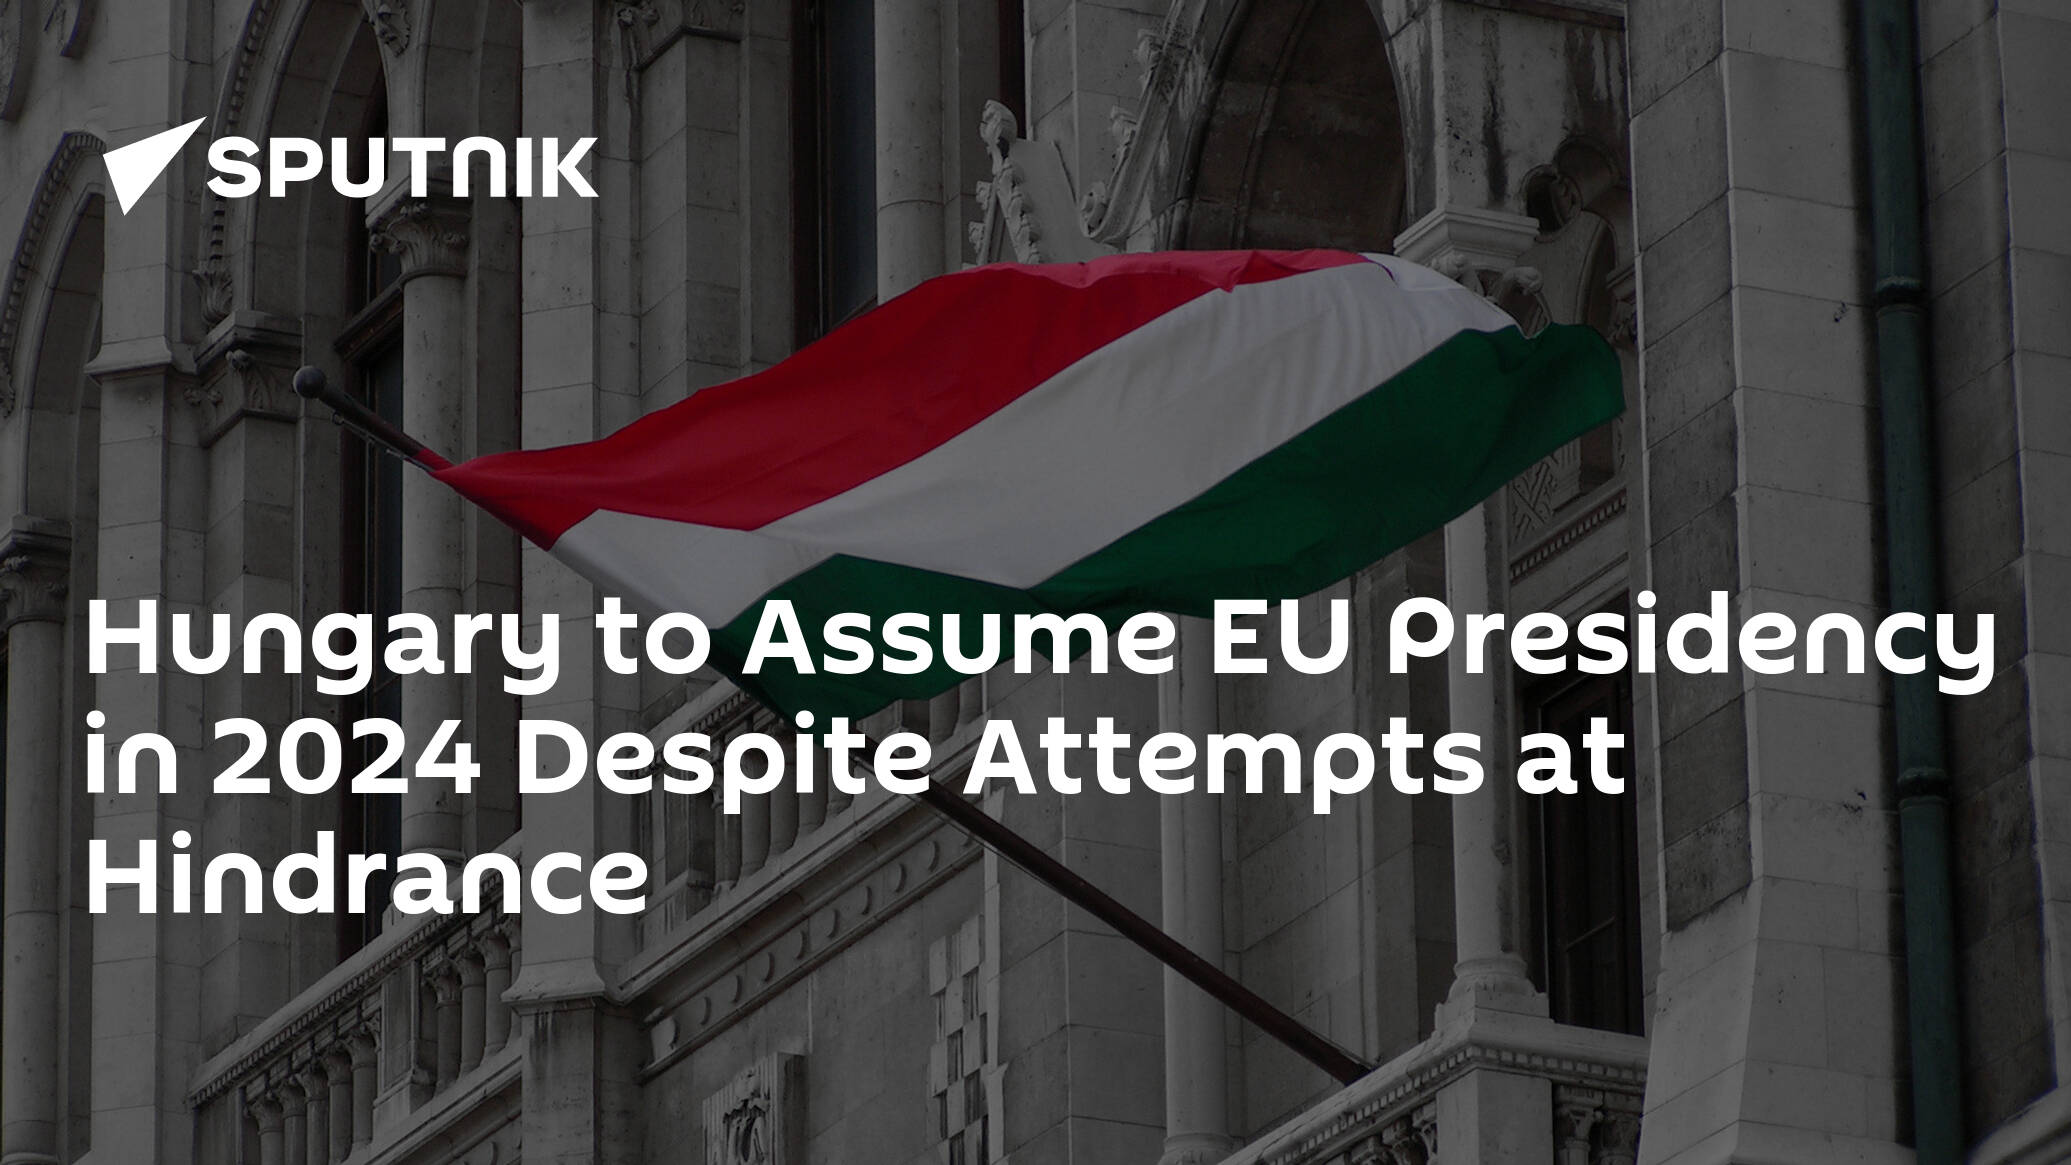 Hungary to Assume EU Presidency in 2024 Despite Attempts at Hindrance